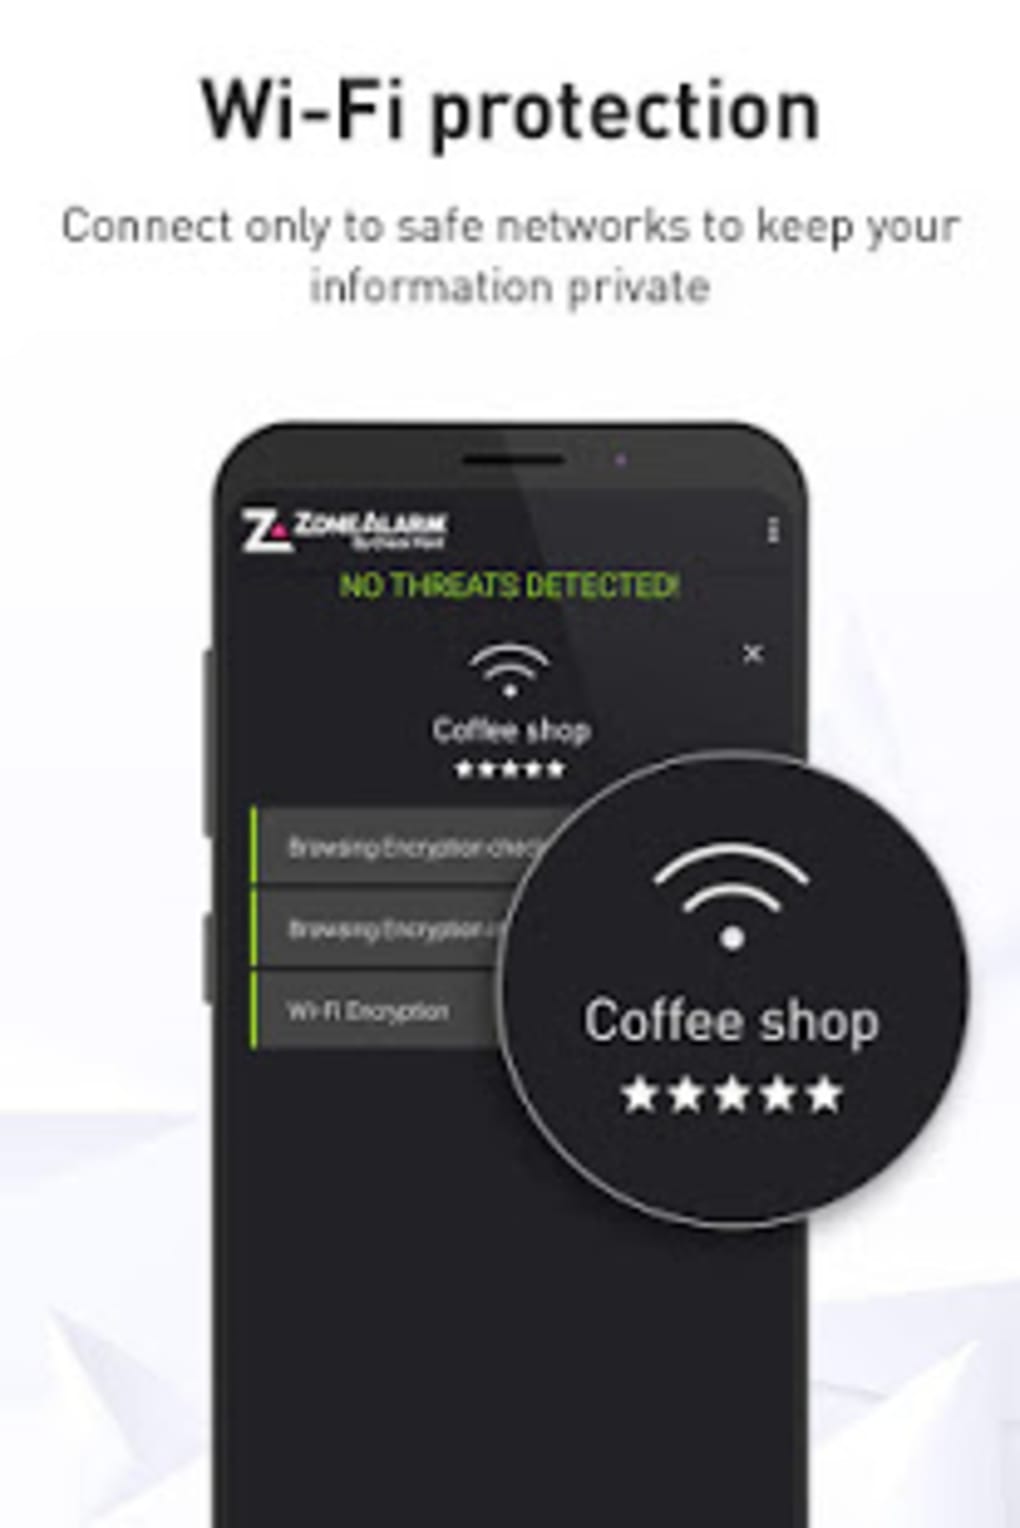 download zonealarm by check point